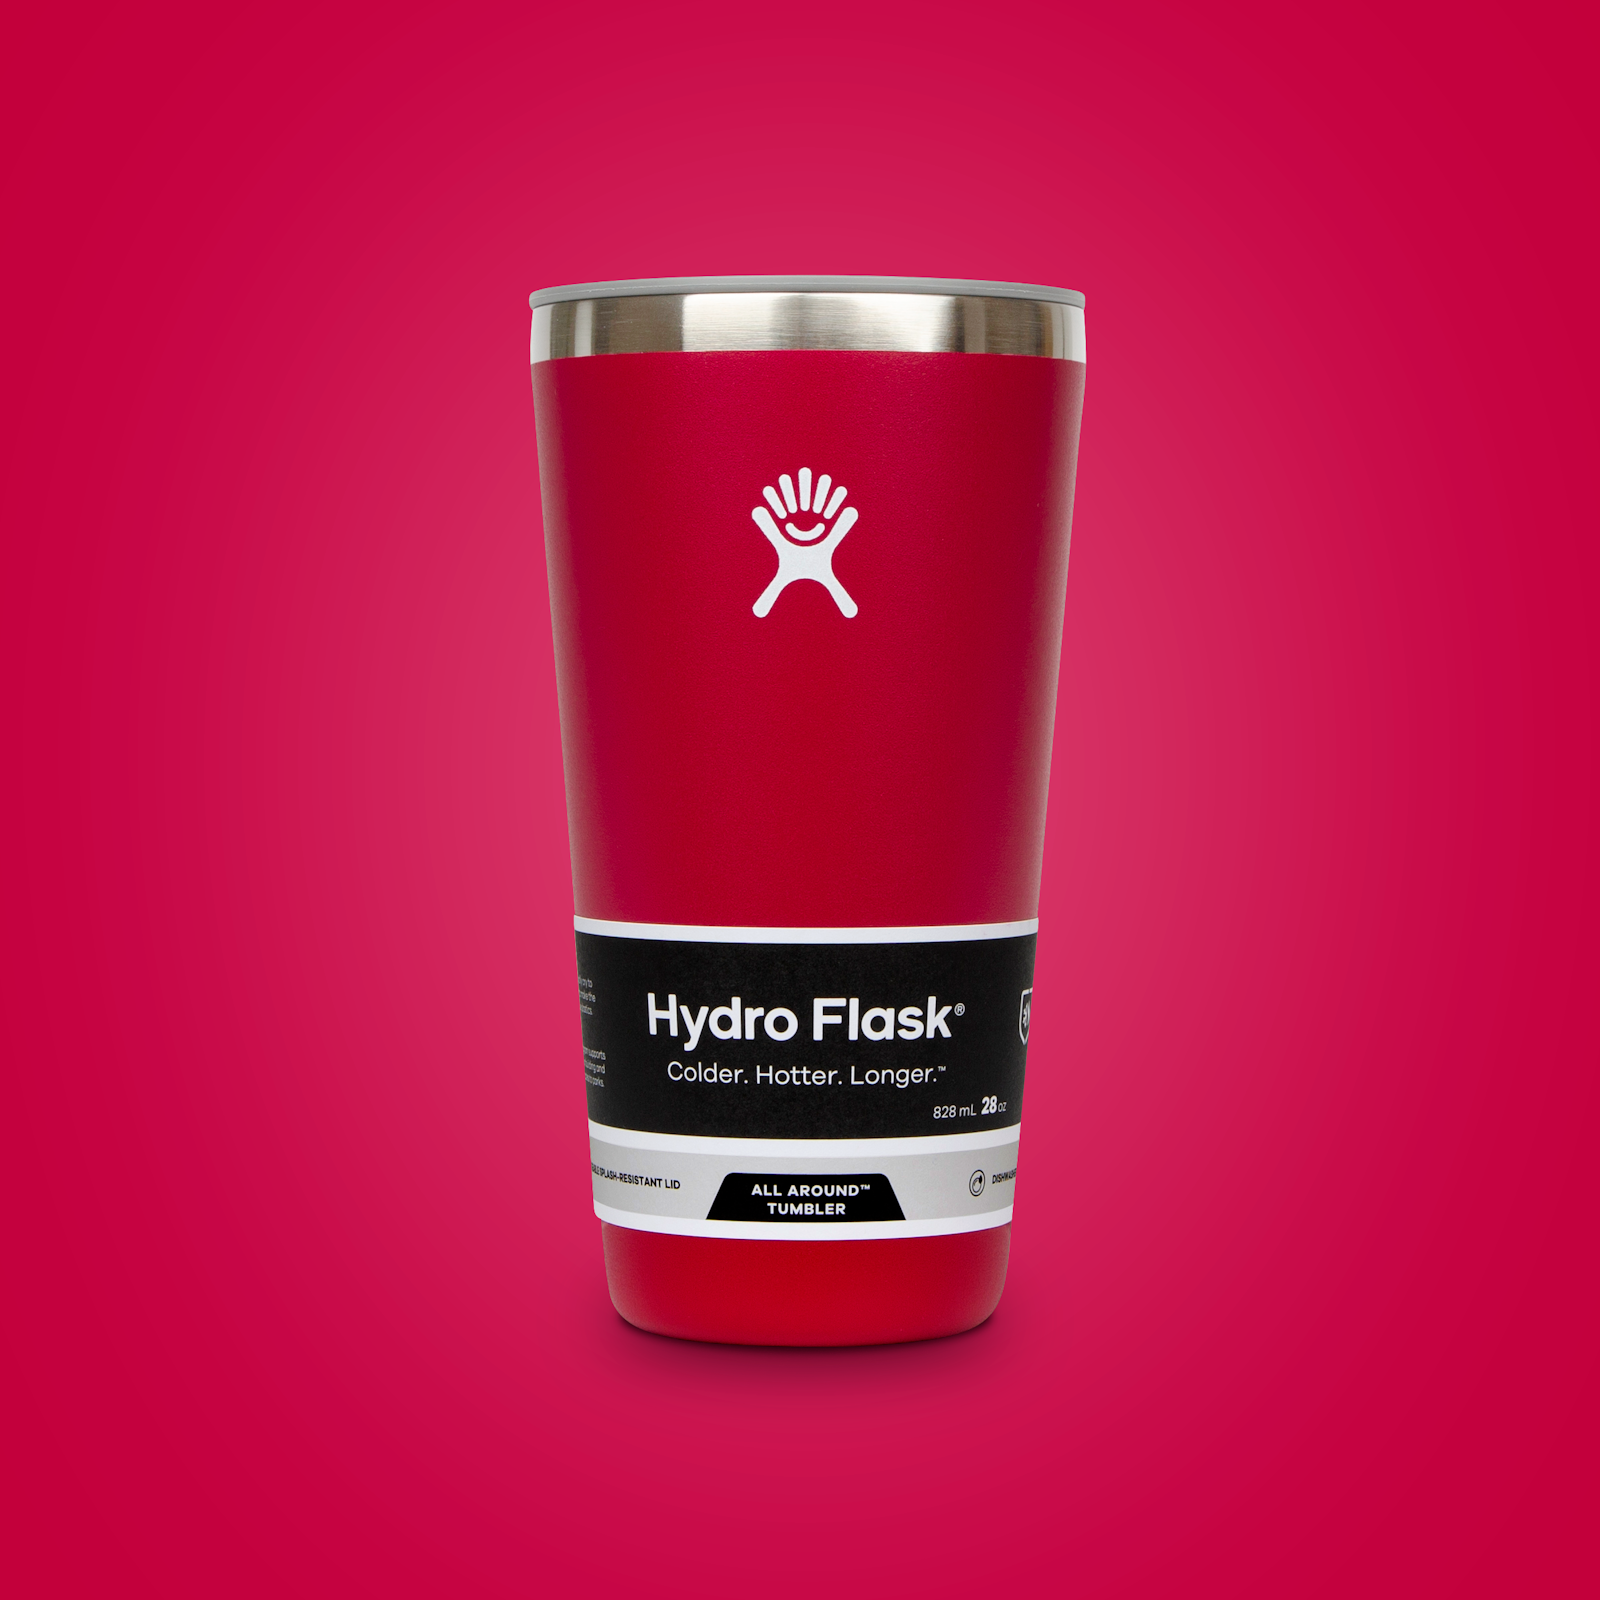 The Hydro Flask brand design Tumbler All Around in red on a red background.